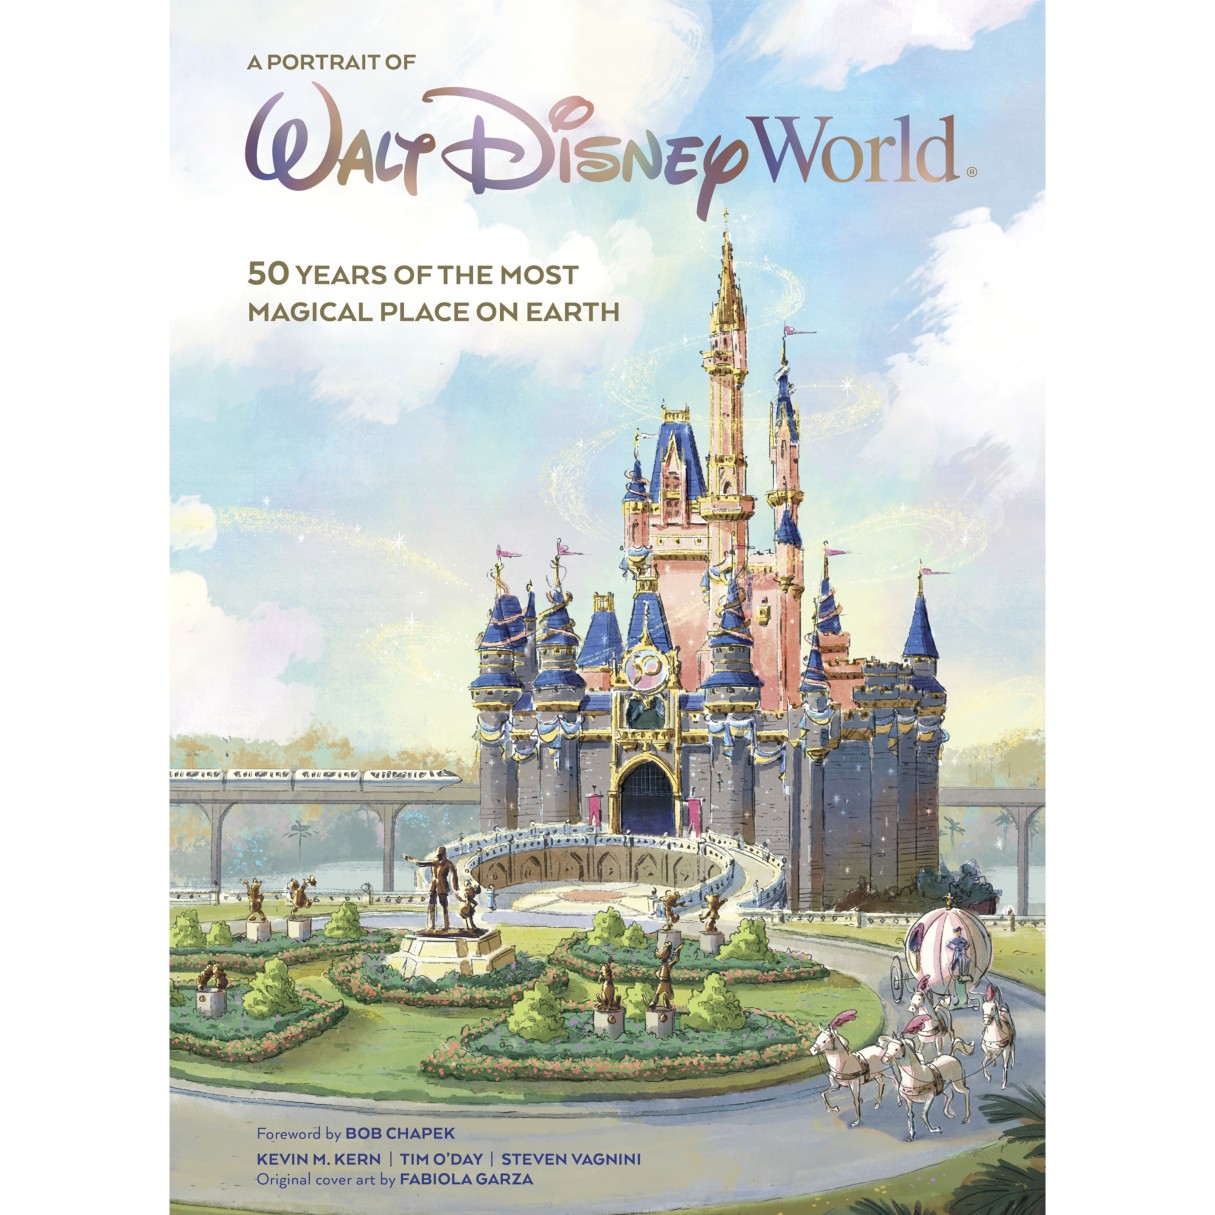 A Portrait of Walt Disney World: 50 Years of the Most Magical Place on Earth Book